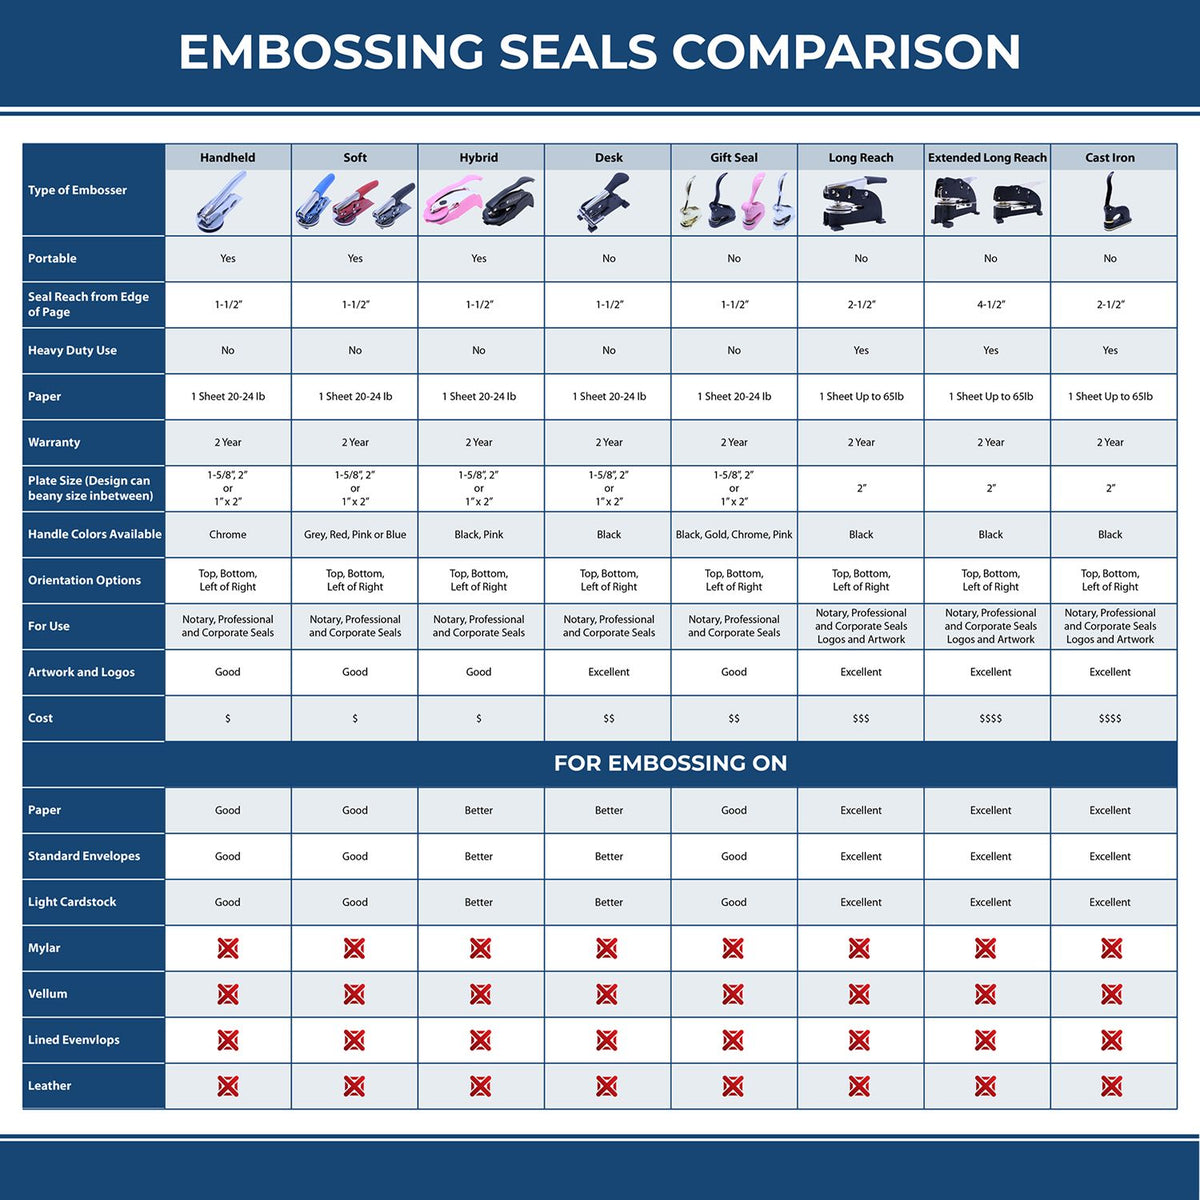 A comparison chart for the different types of mount models available for the Handheld North Dakota Professional Geologist Embosser